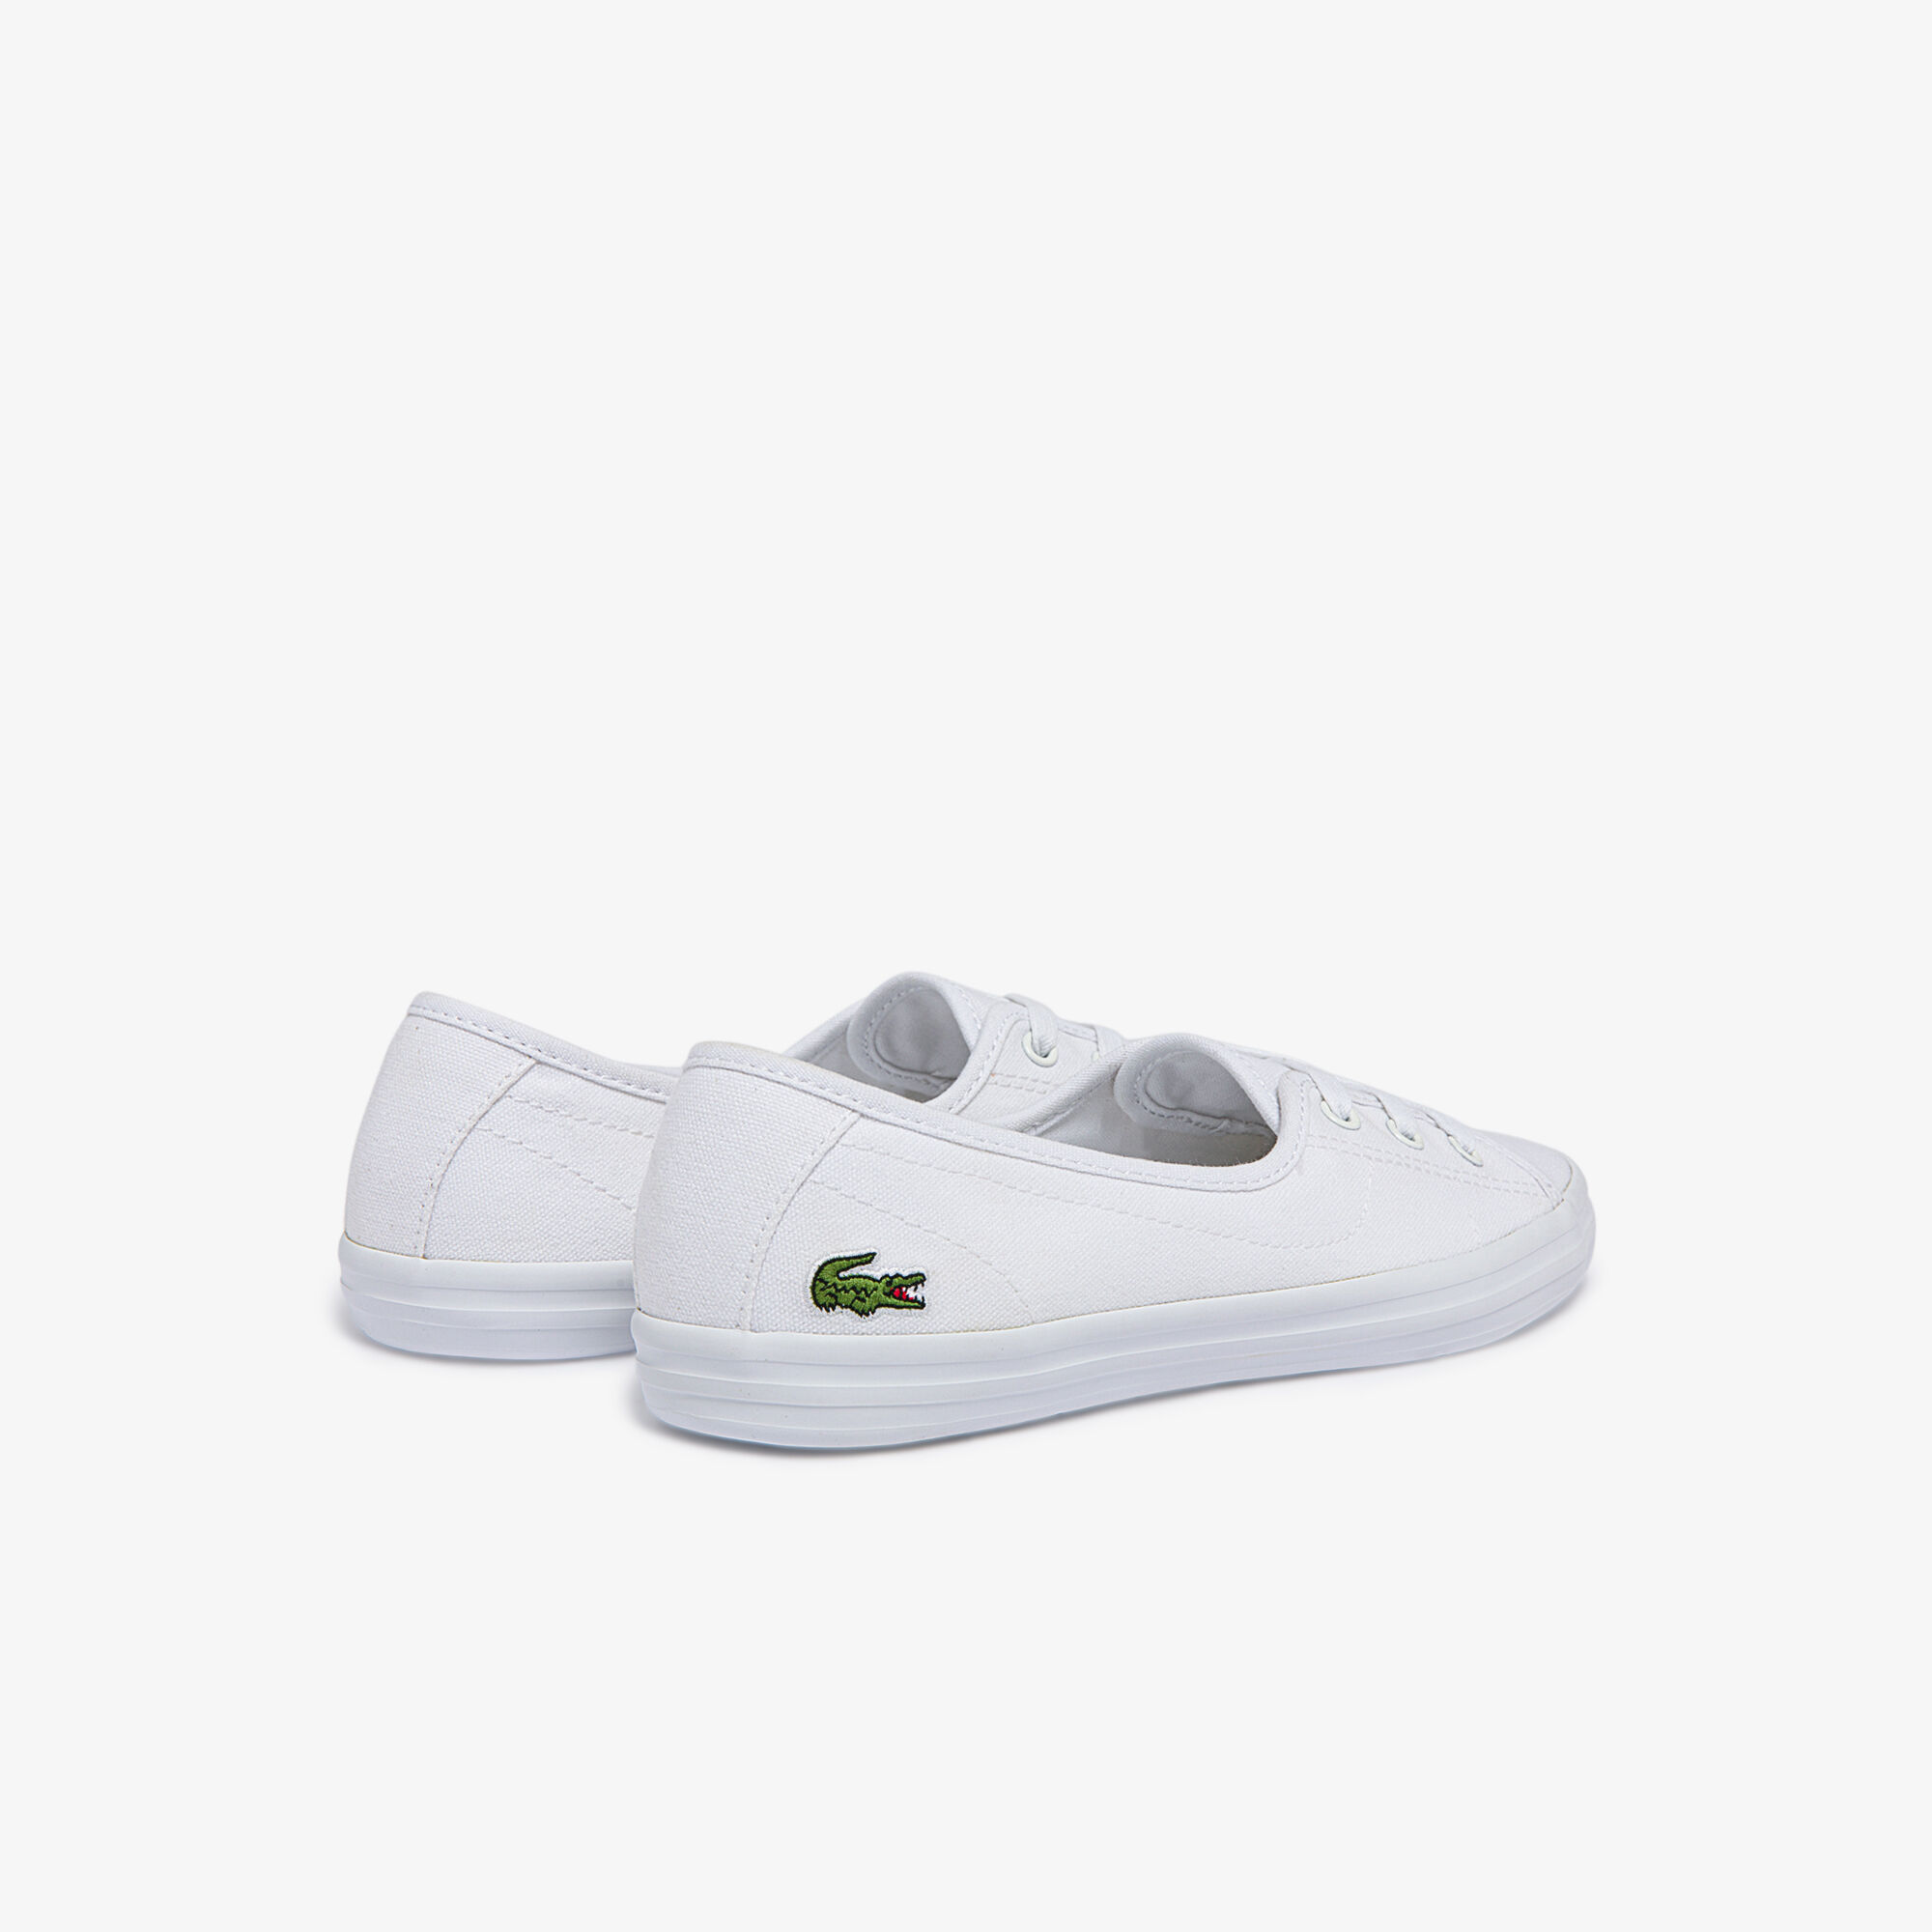 Women's Ziane Chunky Canvas Trainers